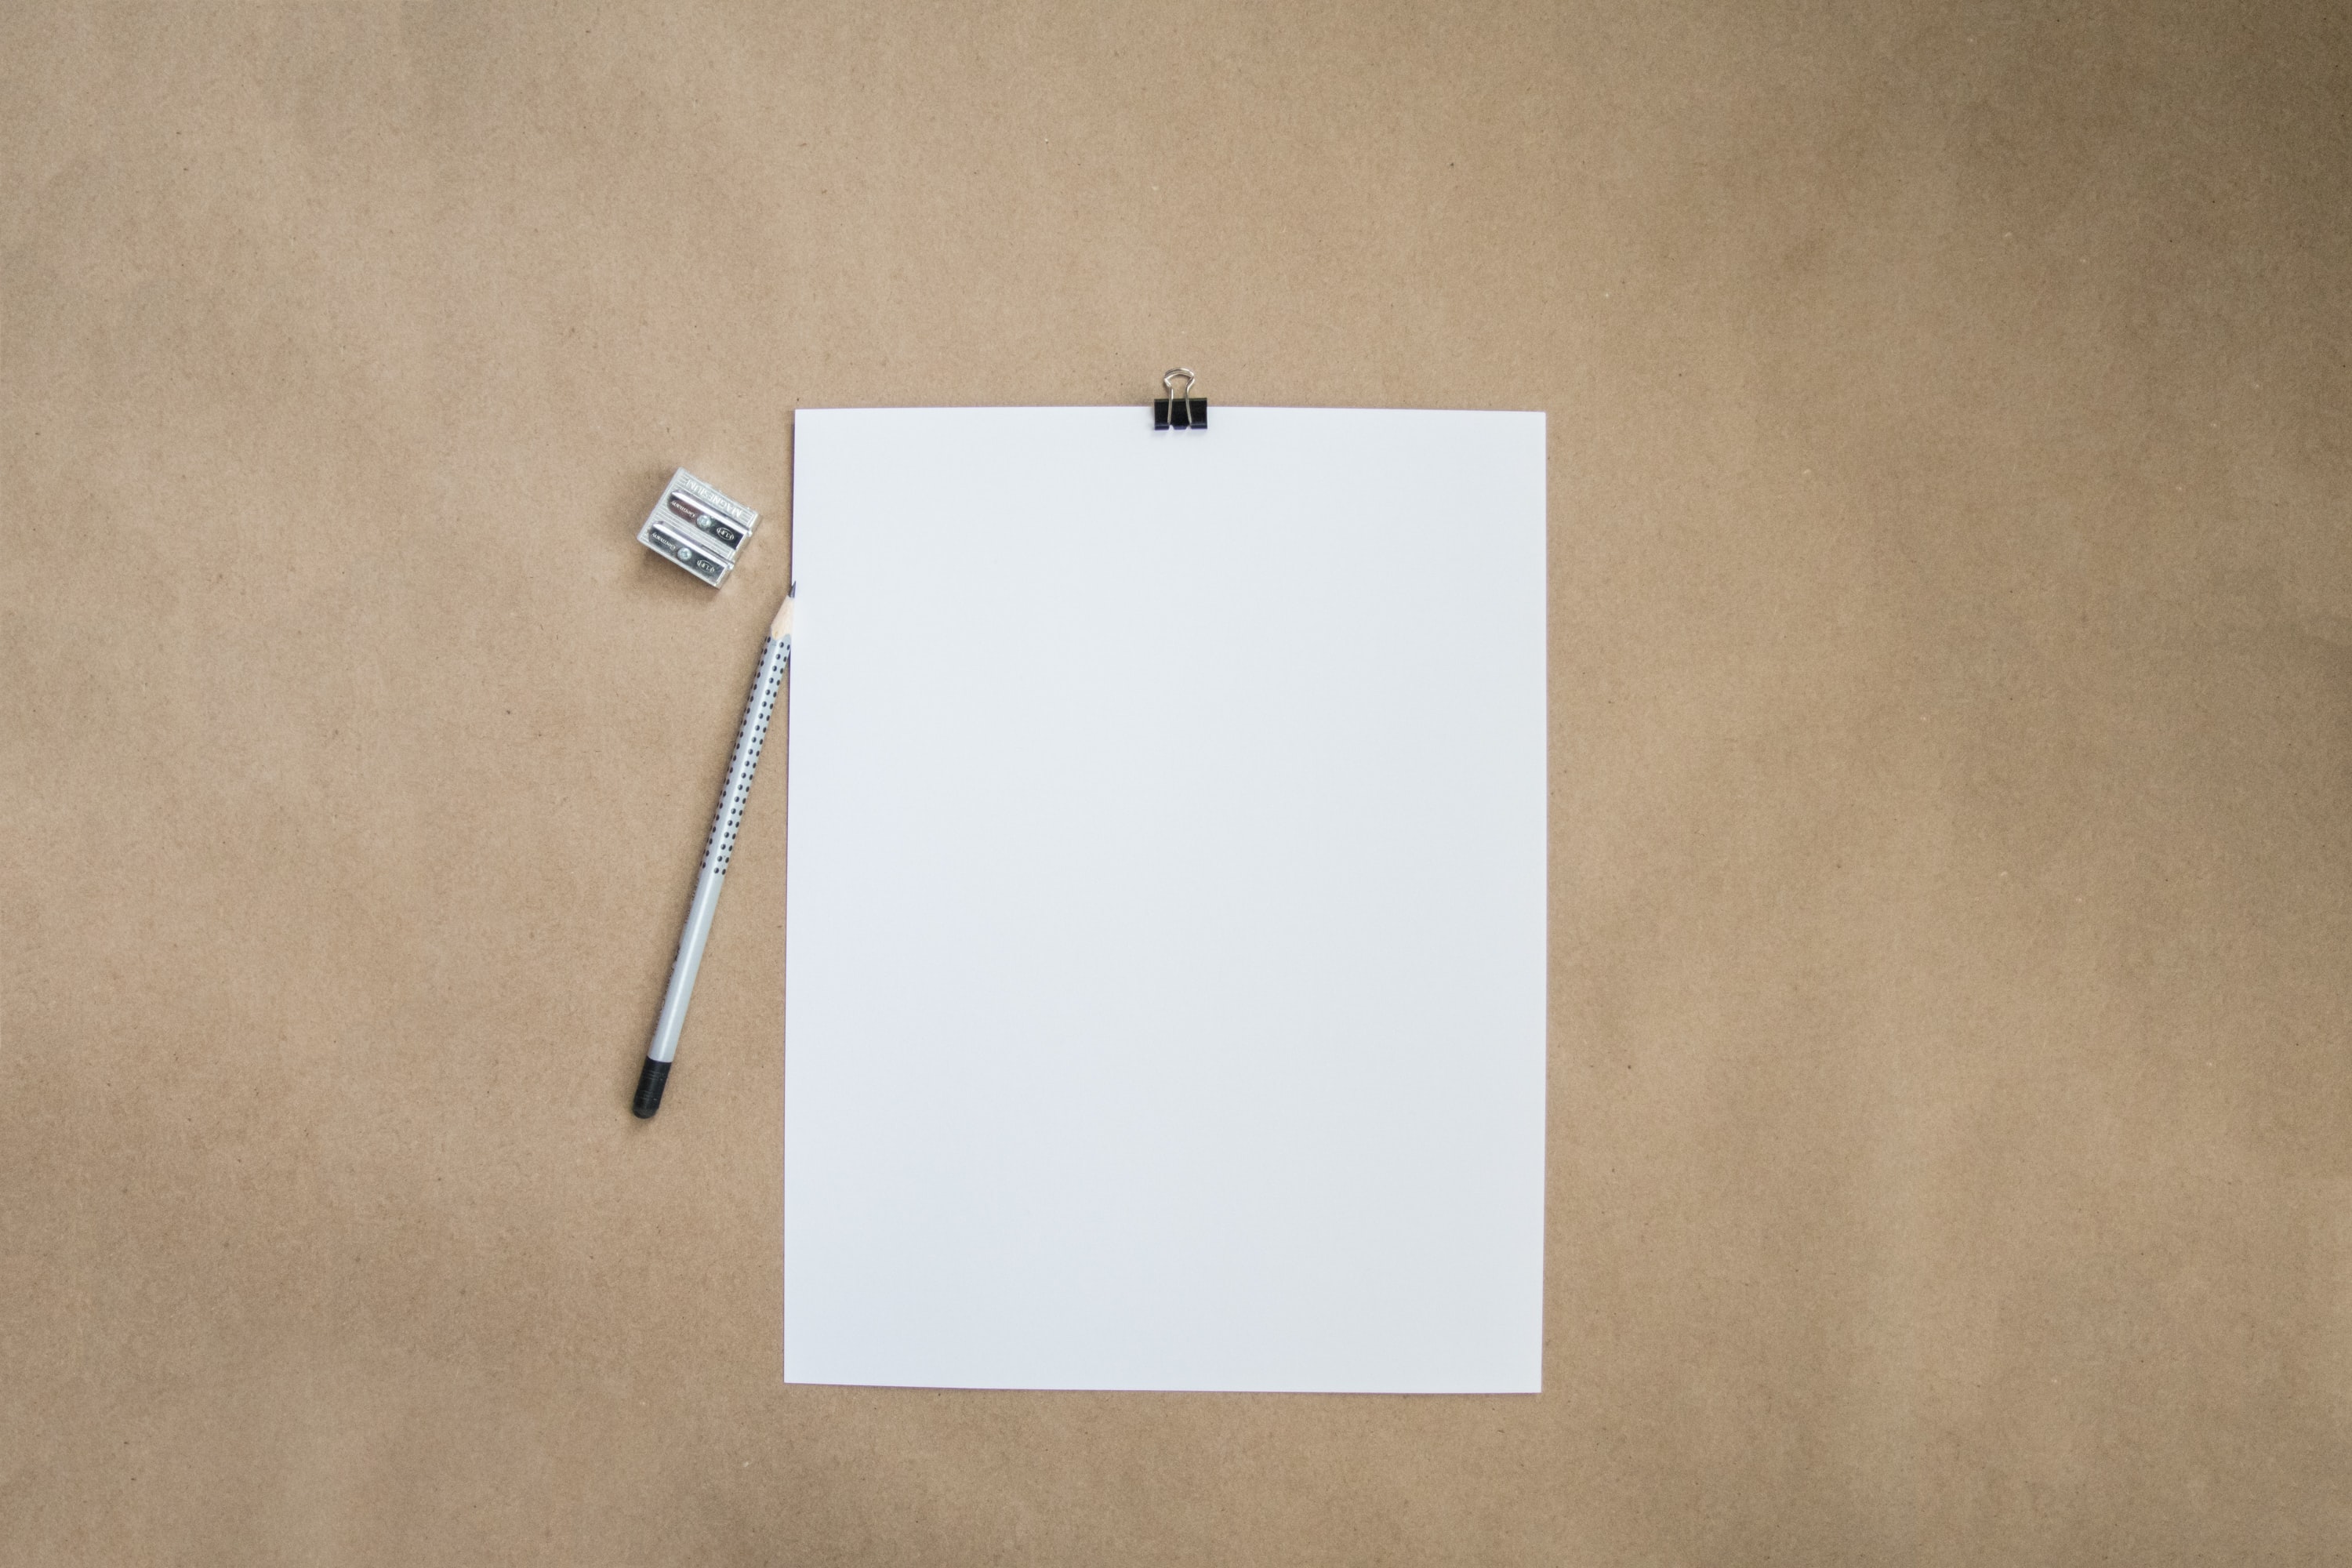 Picture of a blank piece of paper pencil and sharpener